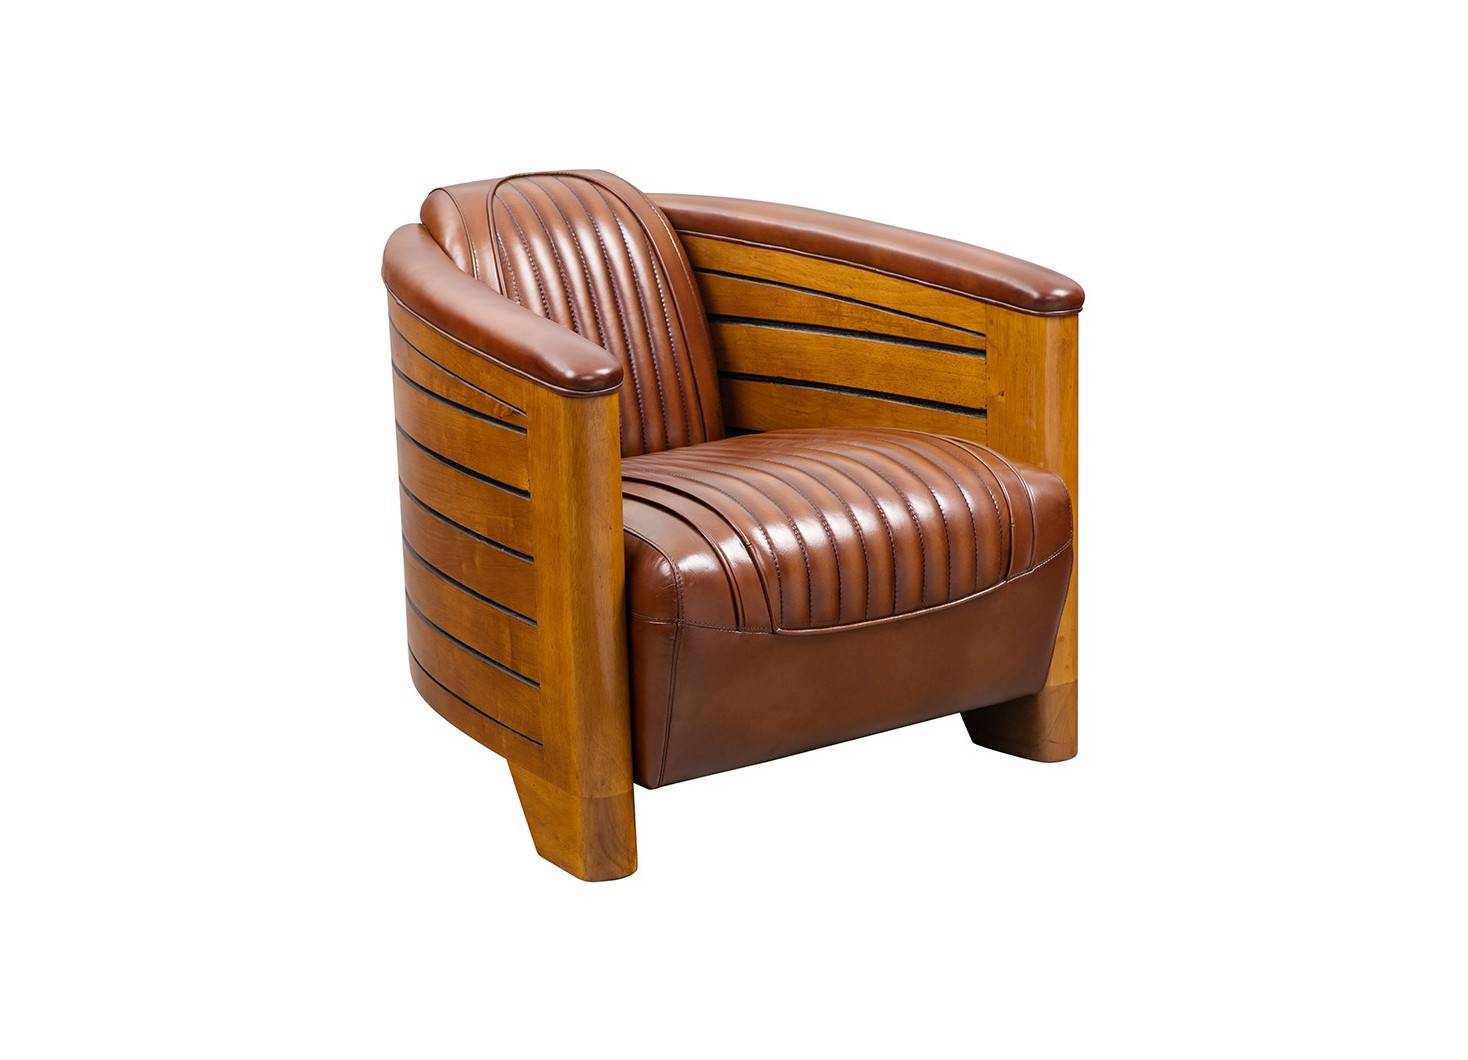 Pirogue armchair - brown leather